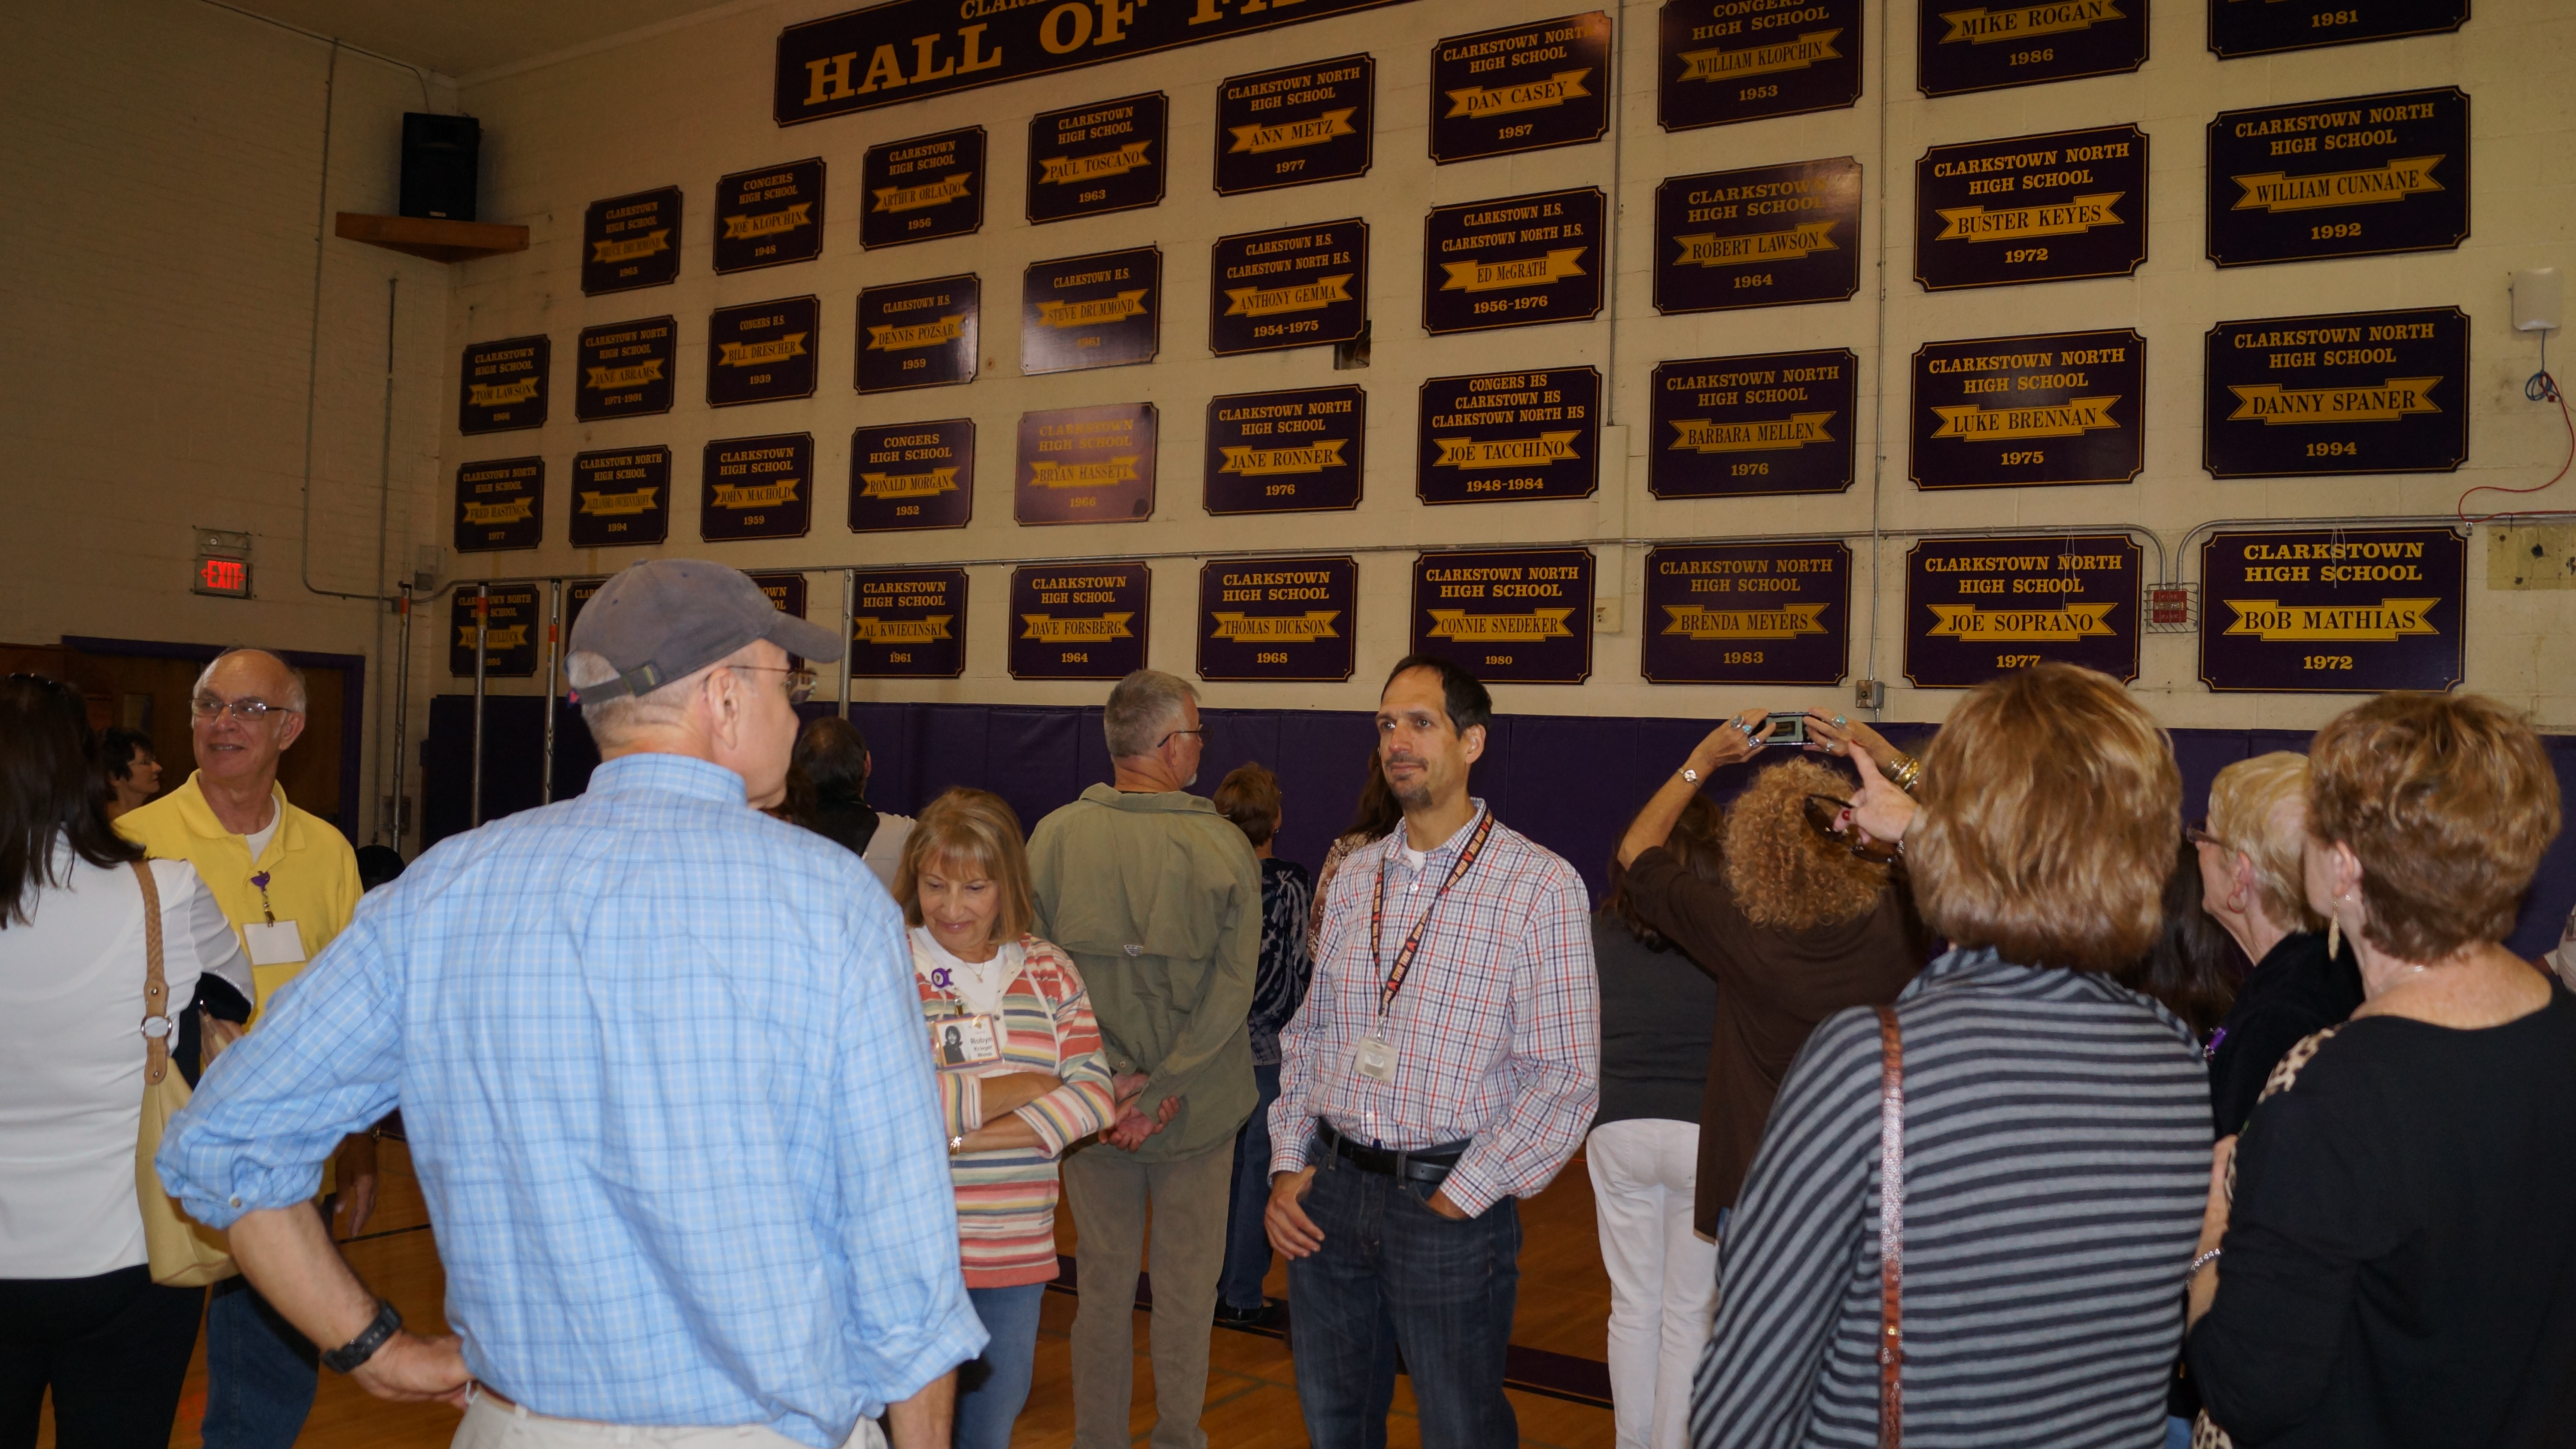 Clarkstown High School Wall of Fame